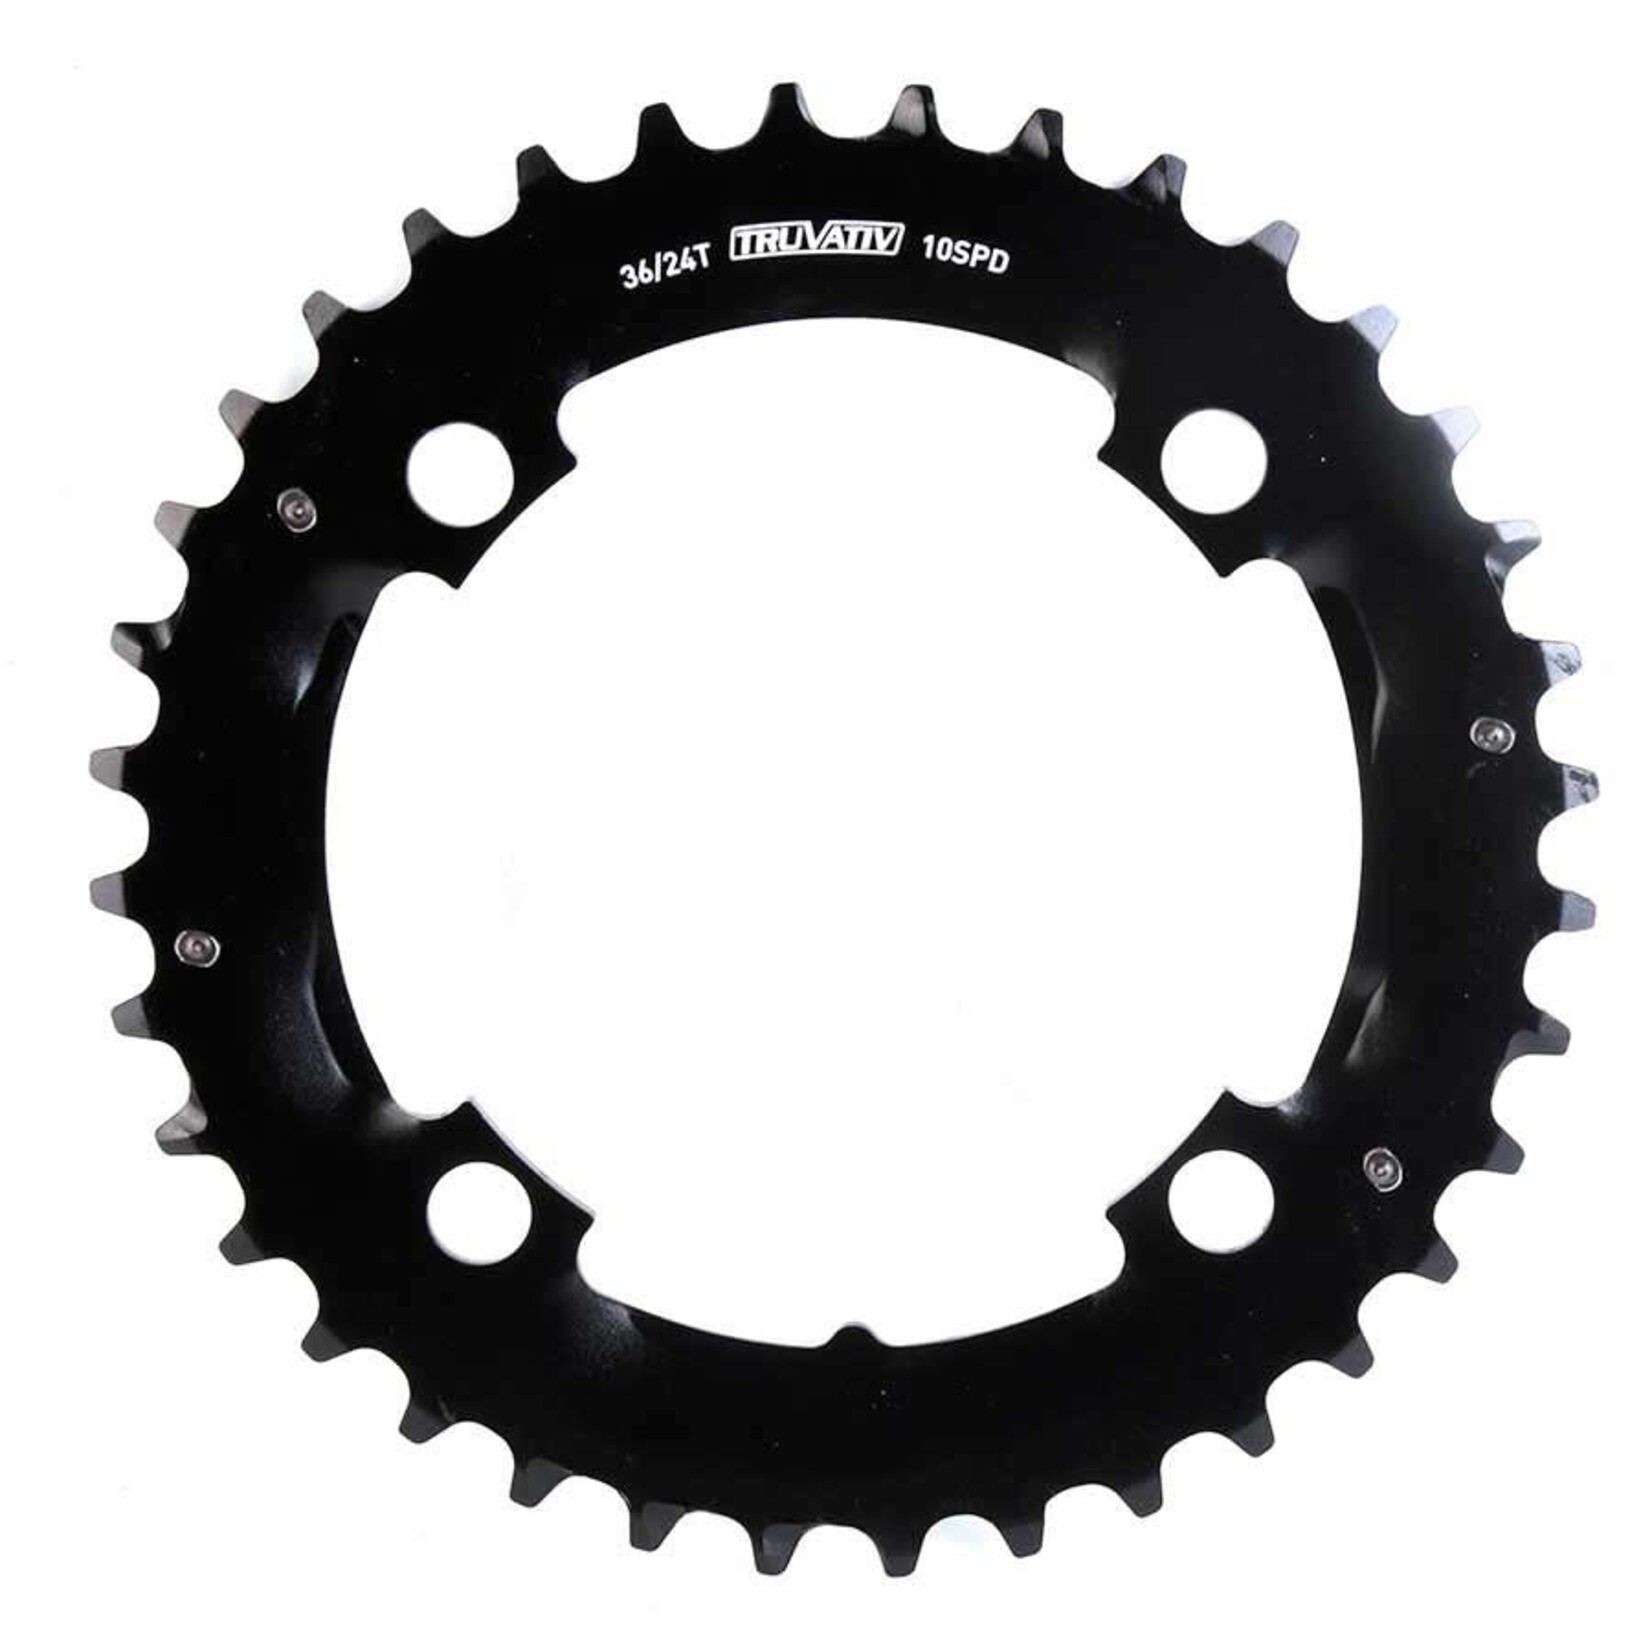 SRAM SRAM, 36T, 10 sp, BCD 104mm, 4-Bolt, Outer Chainring, For MTB double, Aluminum, Black, 11.6215.188.320